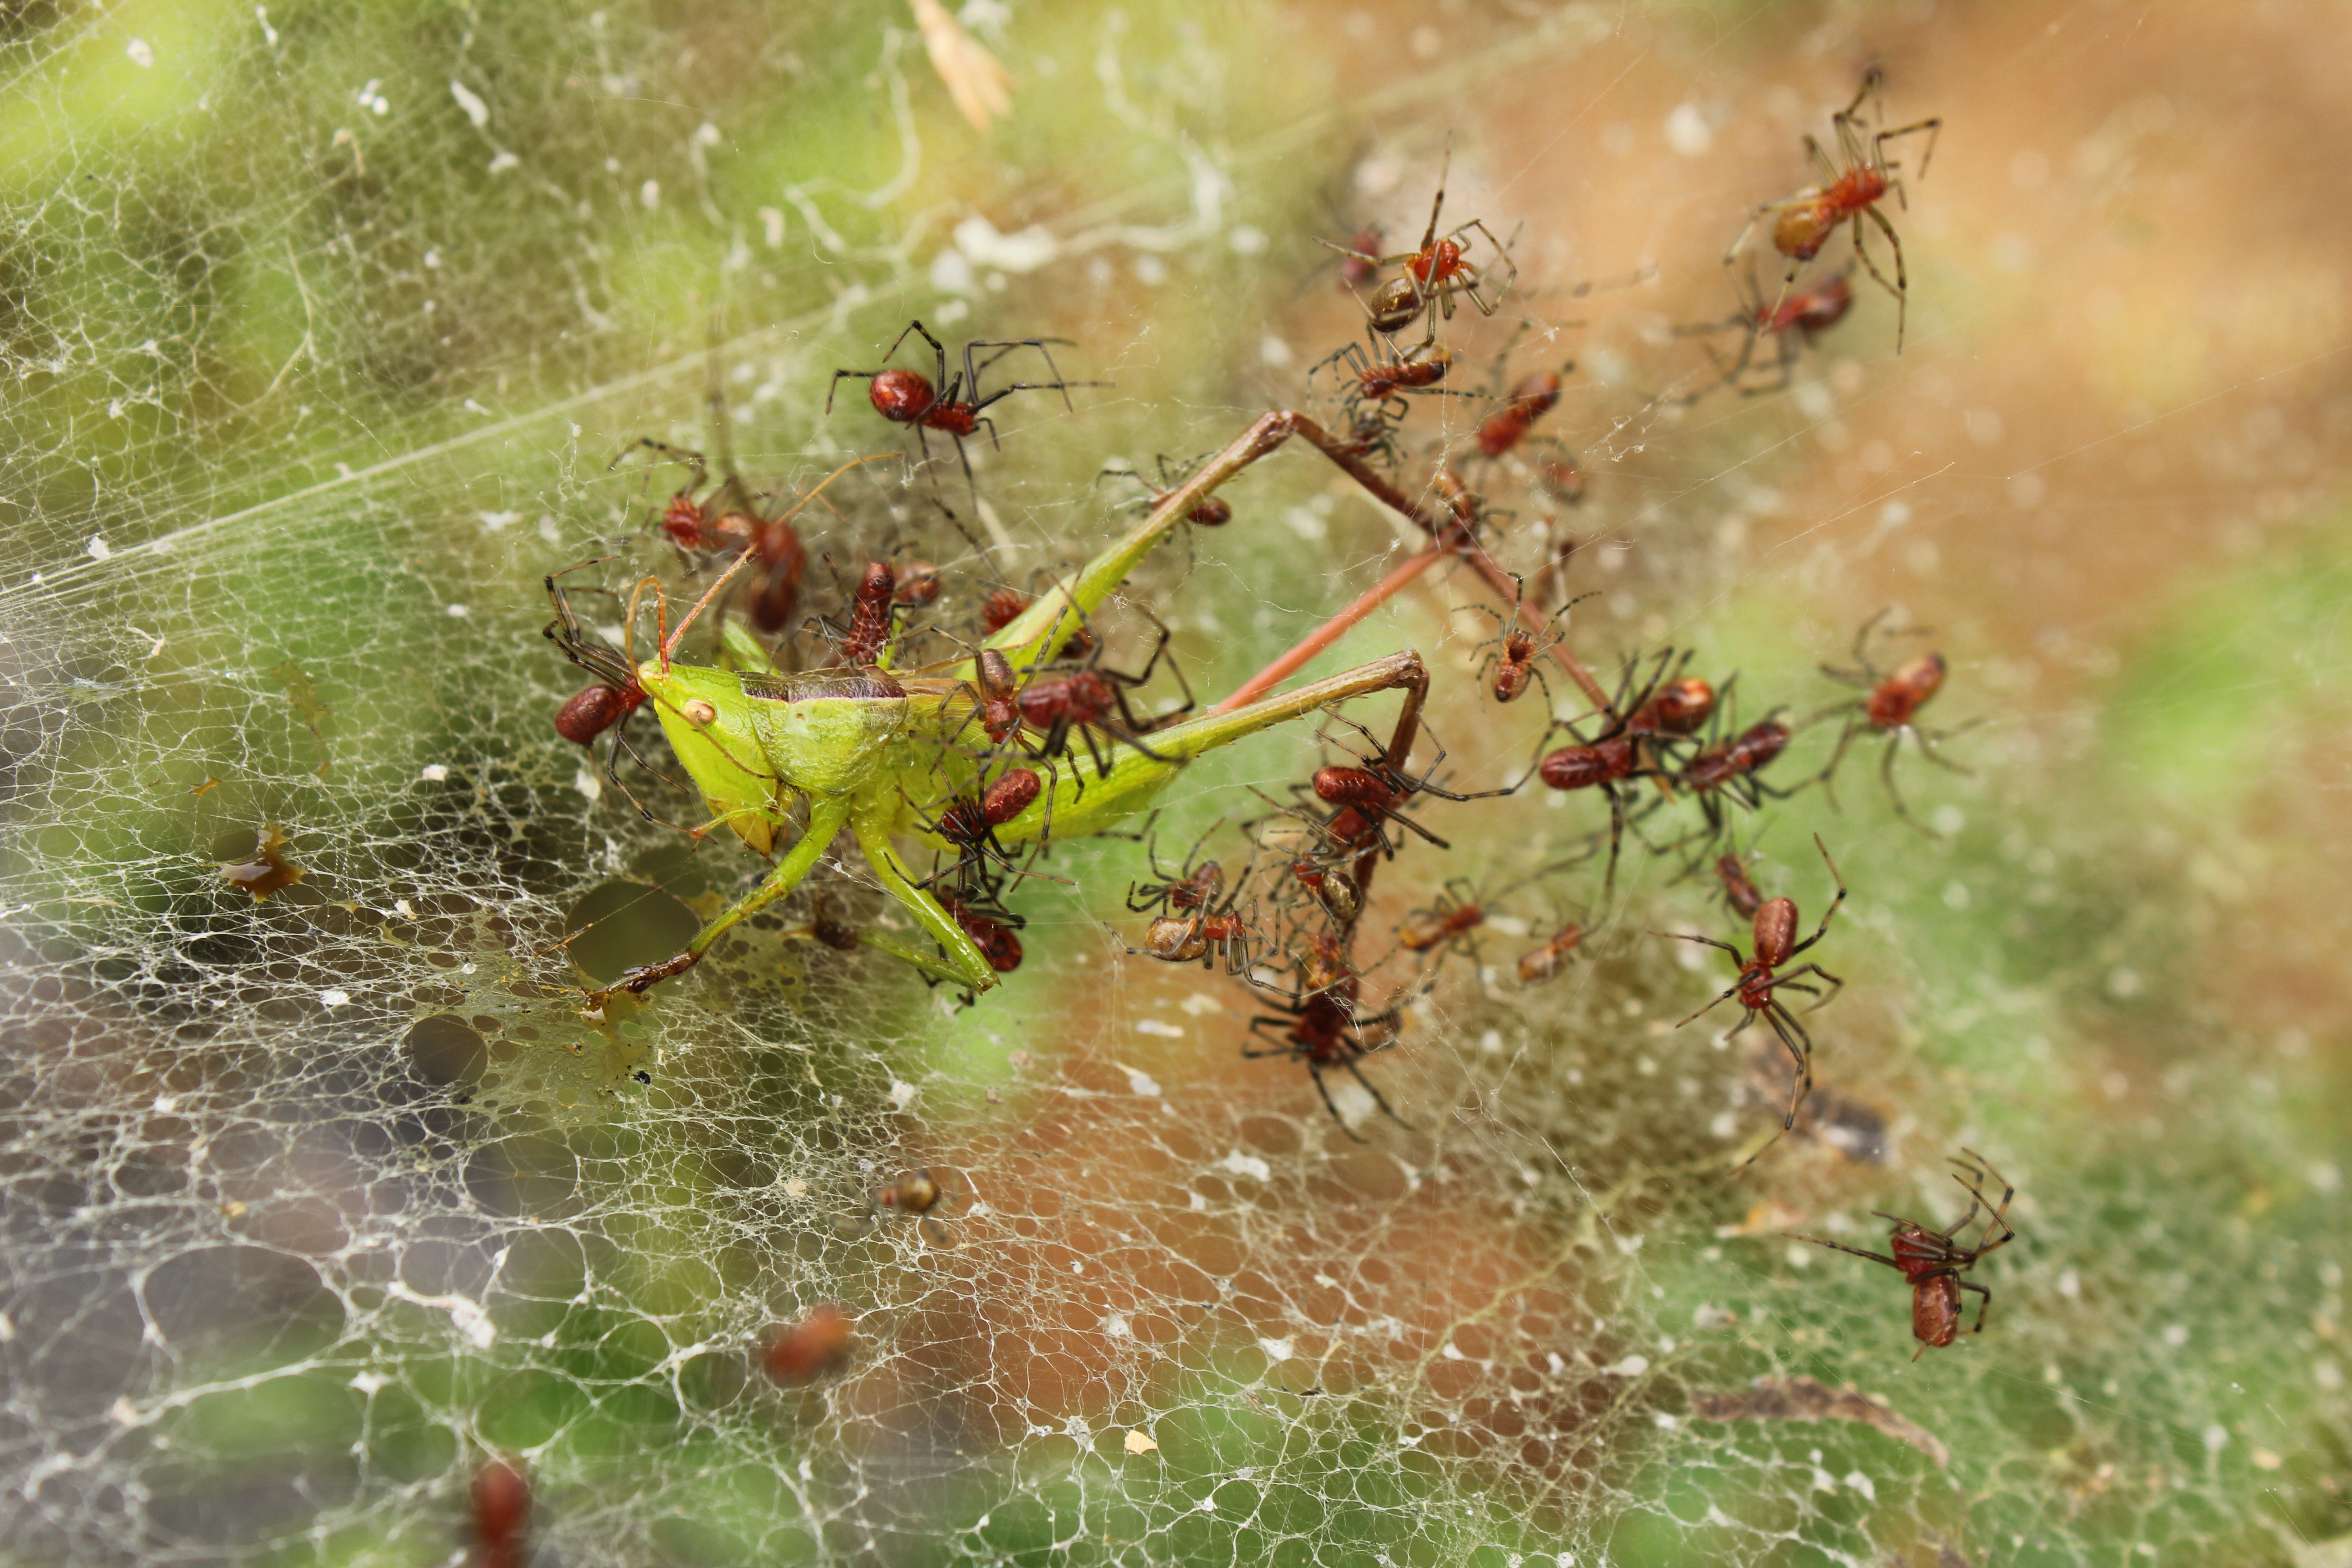 Social spiders catching prey